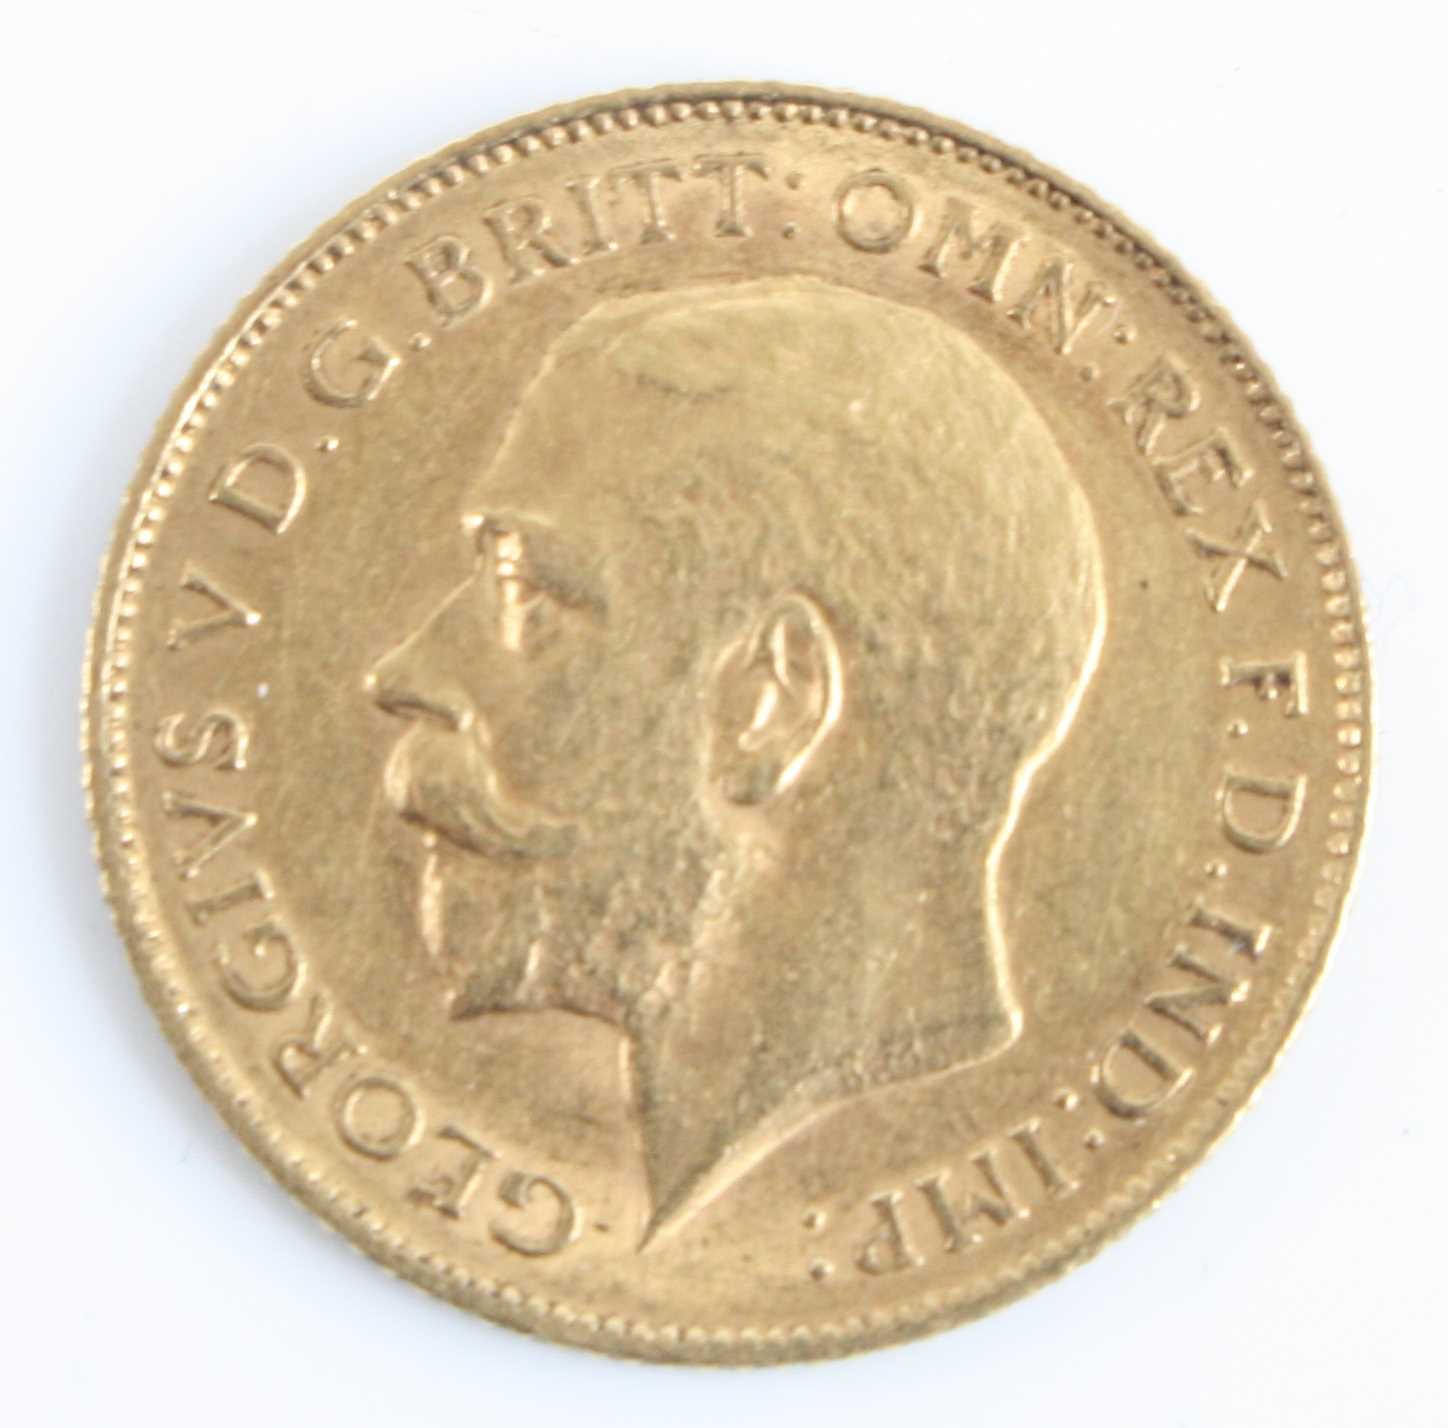 Great Britain, 1911 gold half sovereign, George V, rev: St George and Dragon above date. (1)